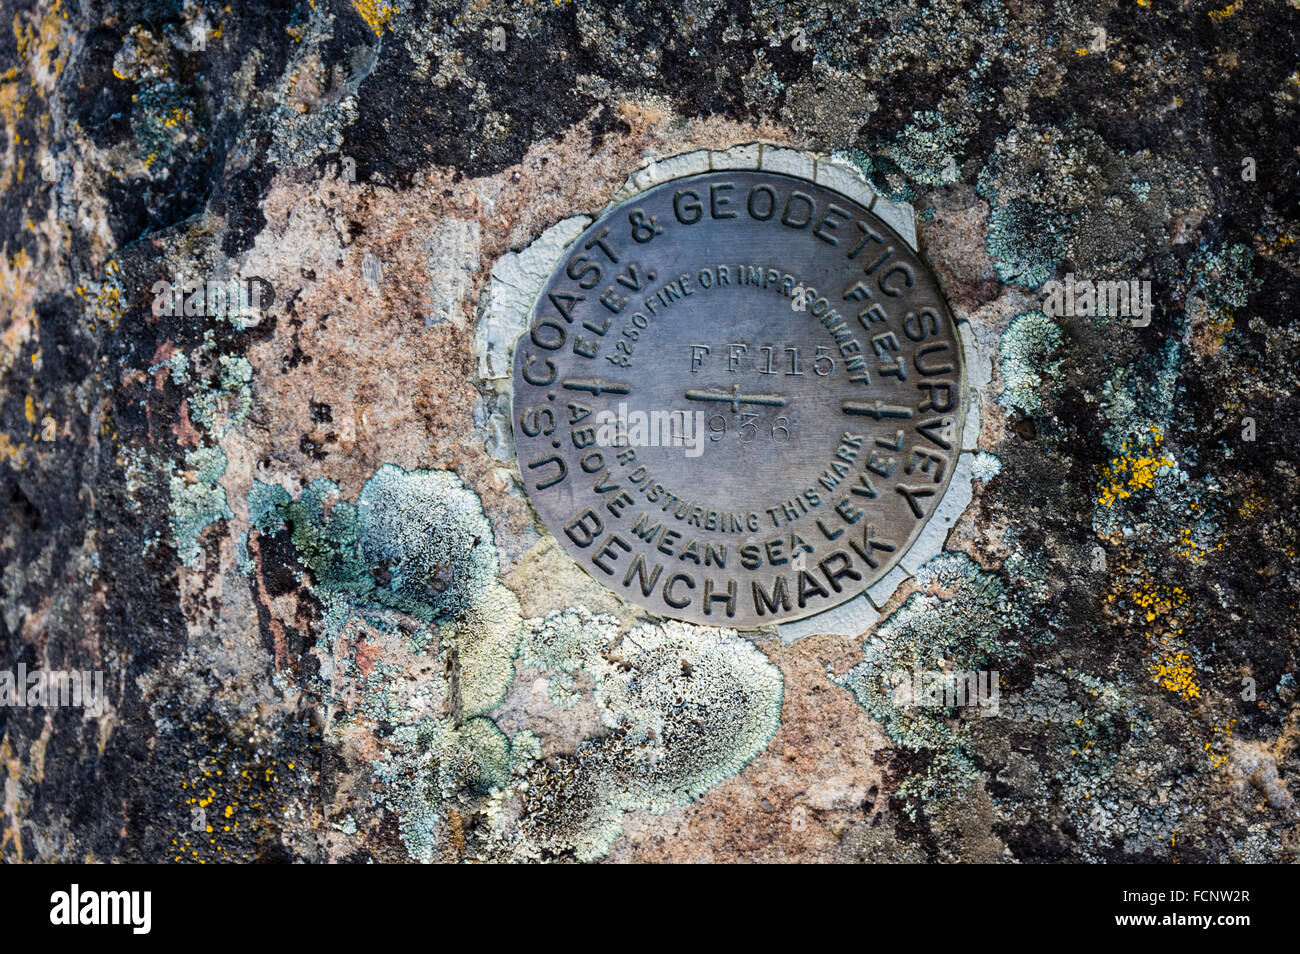 Benchmark plate of the US coast and geodetic survey, placed to mark elevation of a location.  Antelope, Oregon, USA Stock Photo